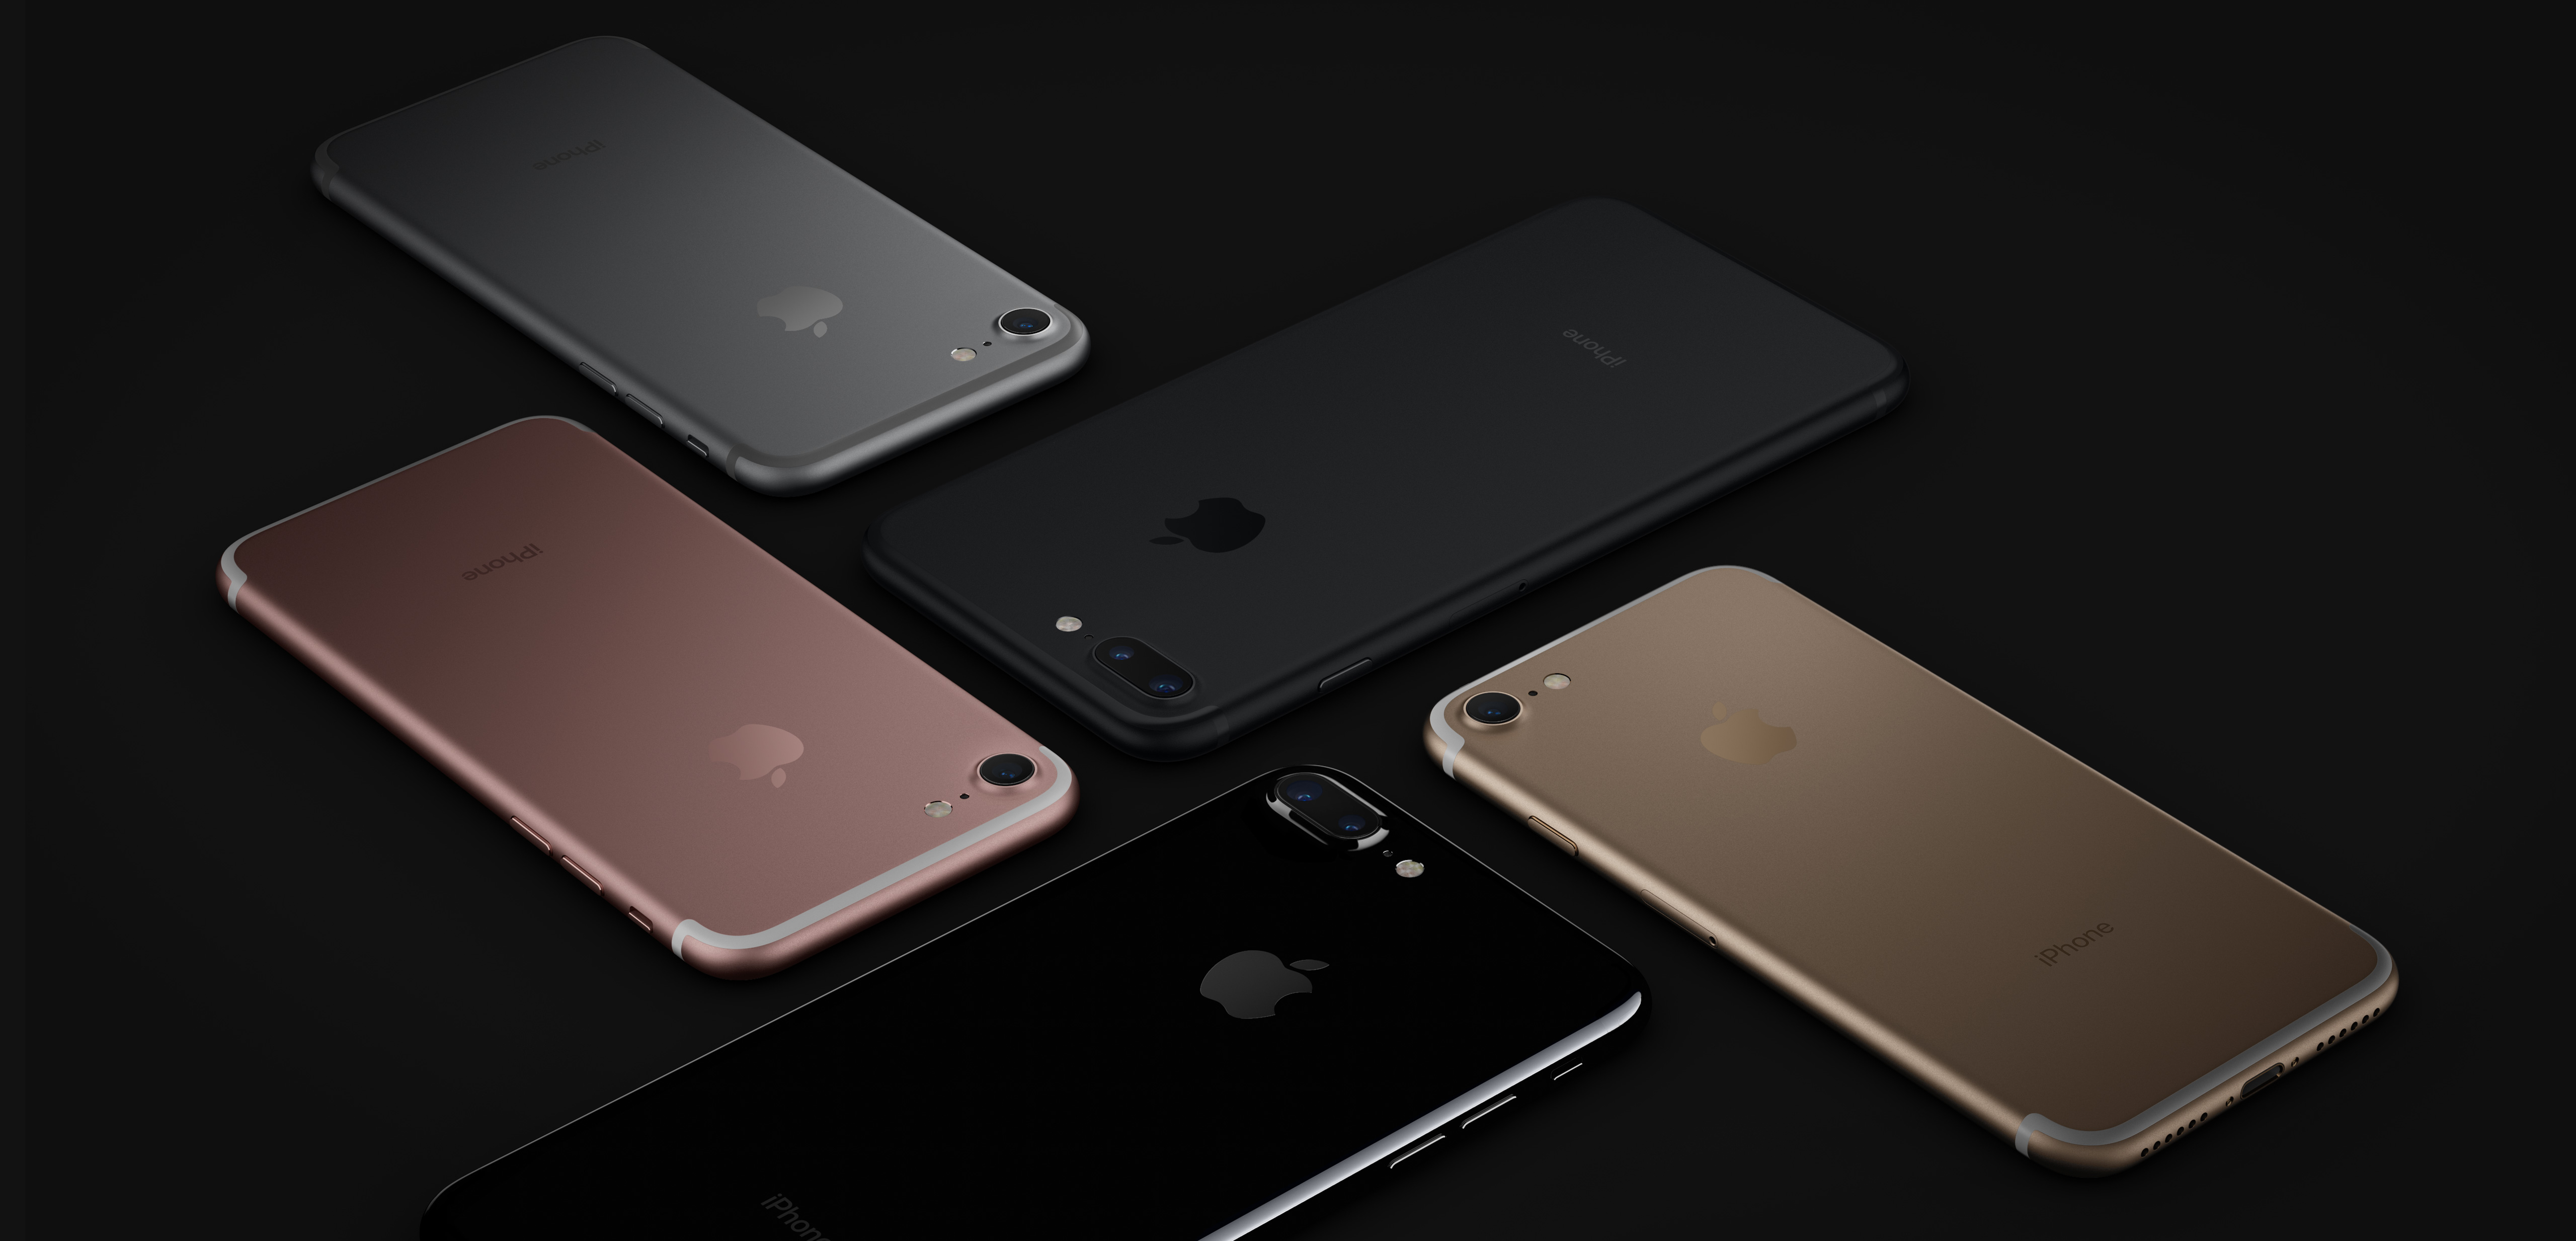 all iPhone 7 finishes